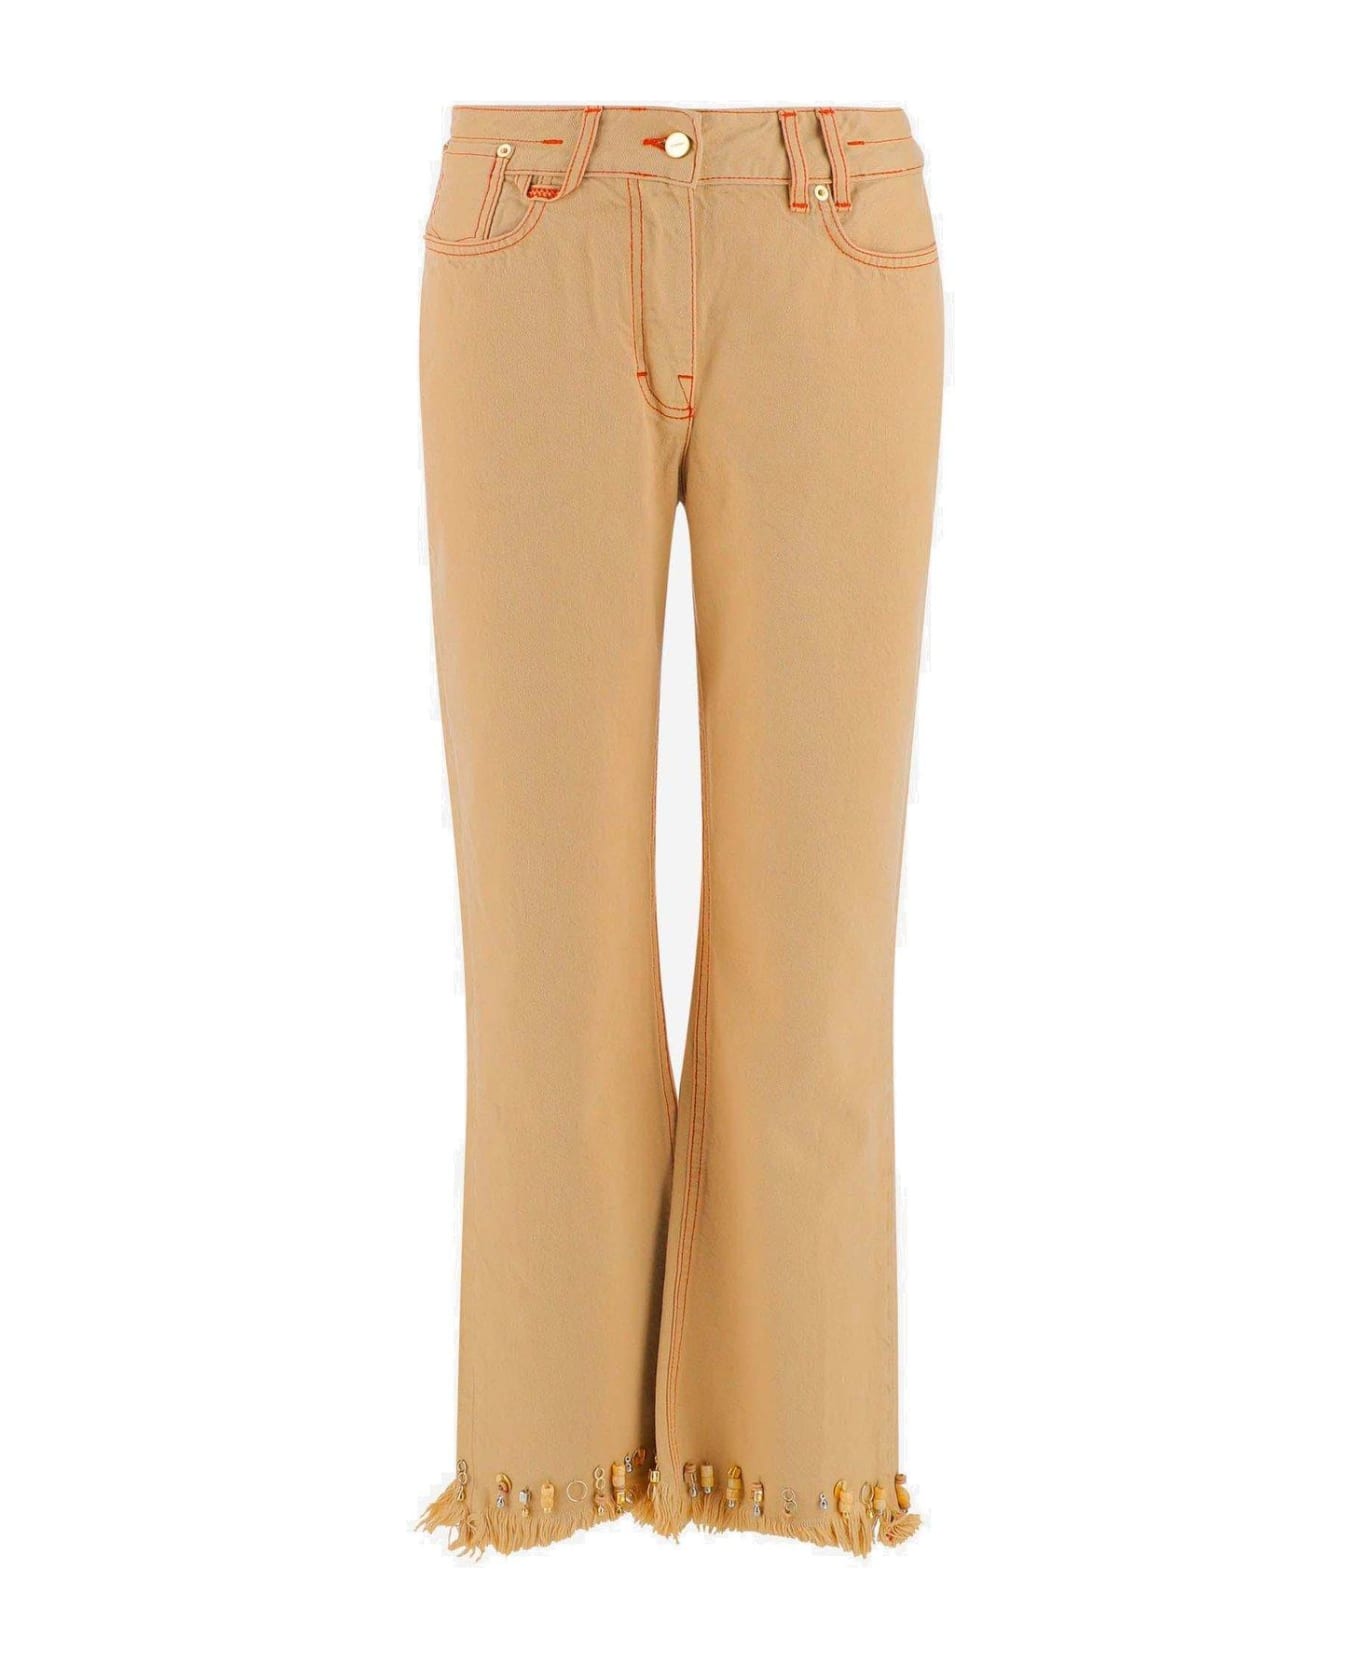 Jacquemus Distressed-effect Flared Jeans - Beige